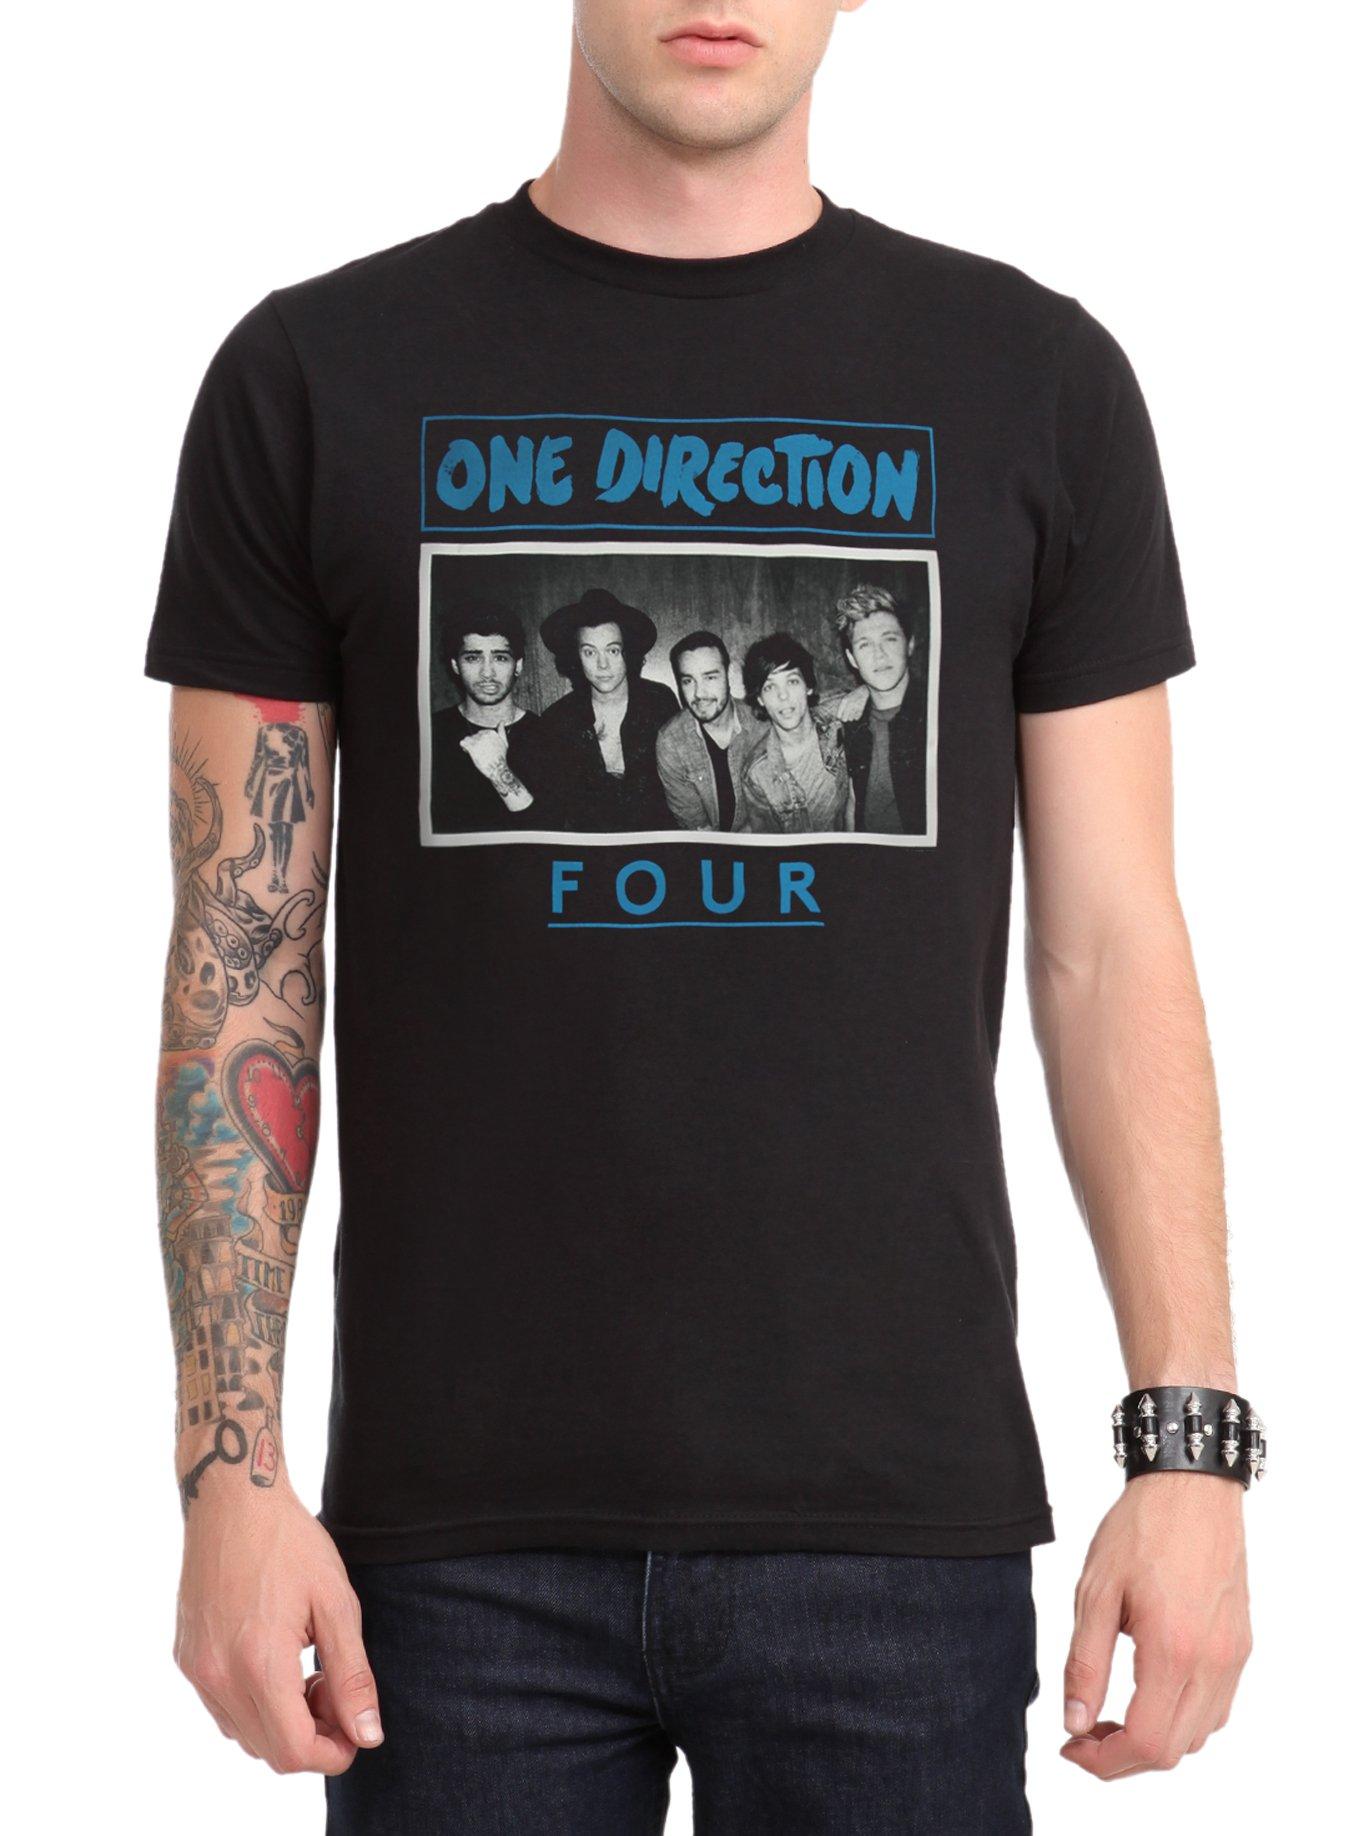 One Direction FOUR T-Shirt Hot Topic